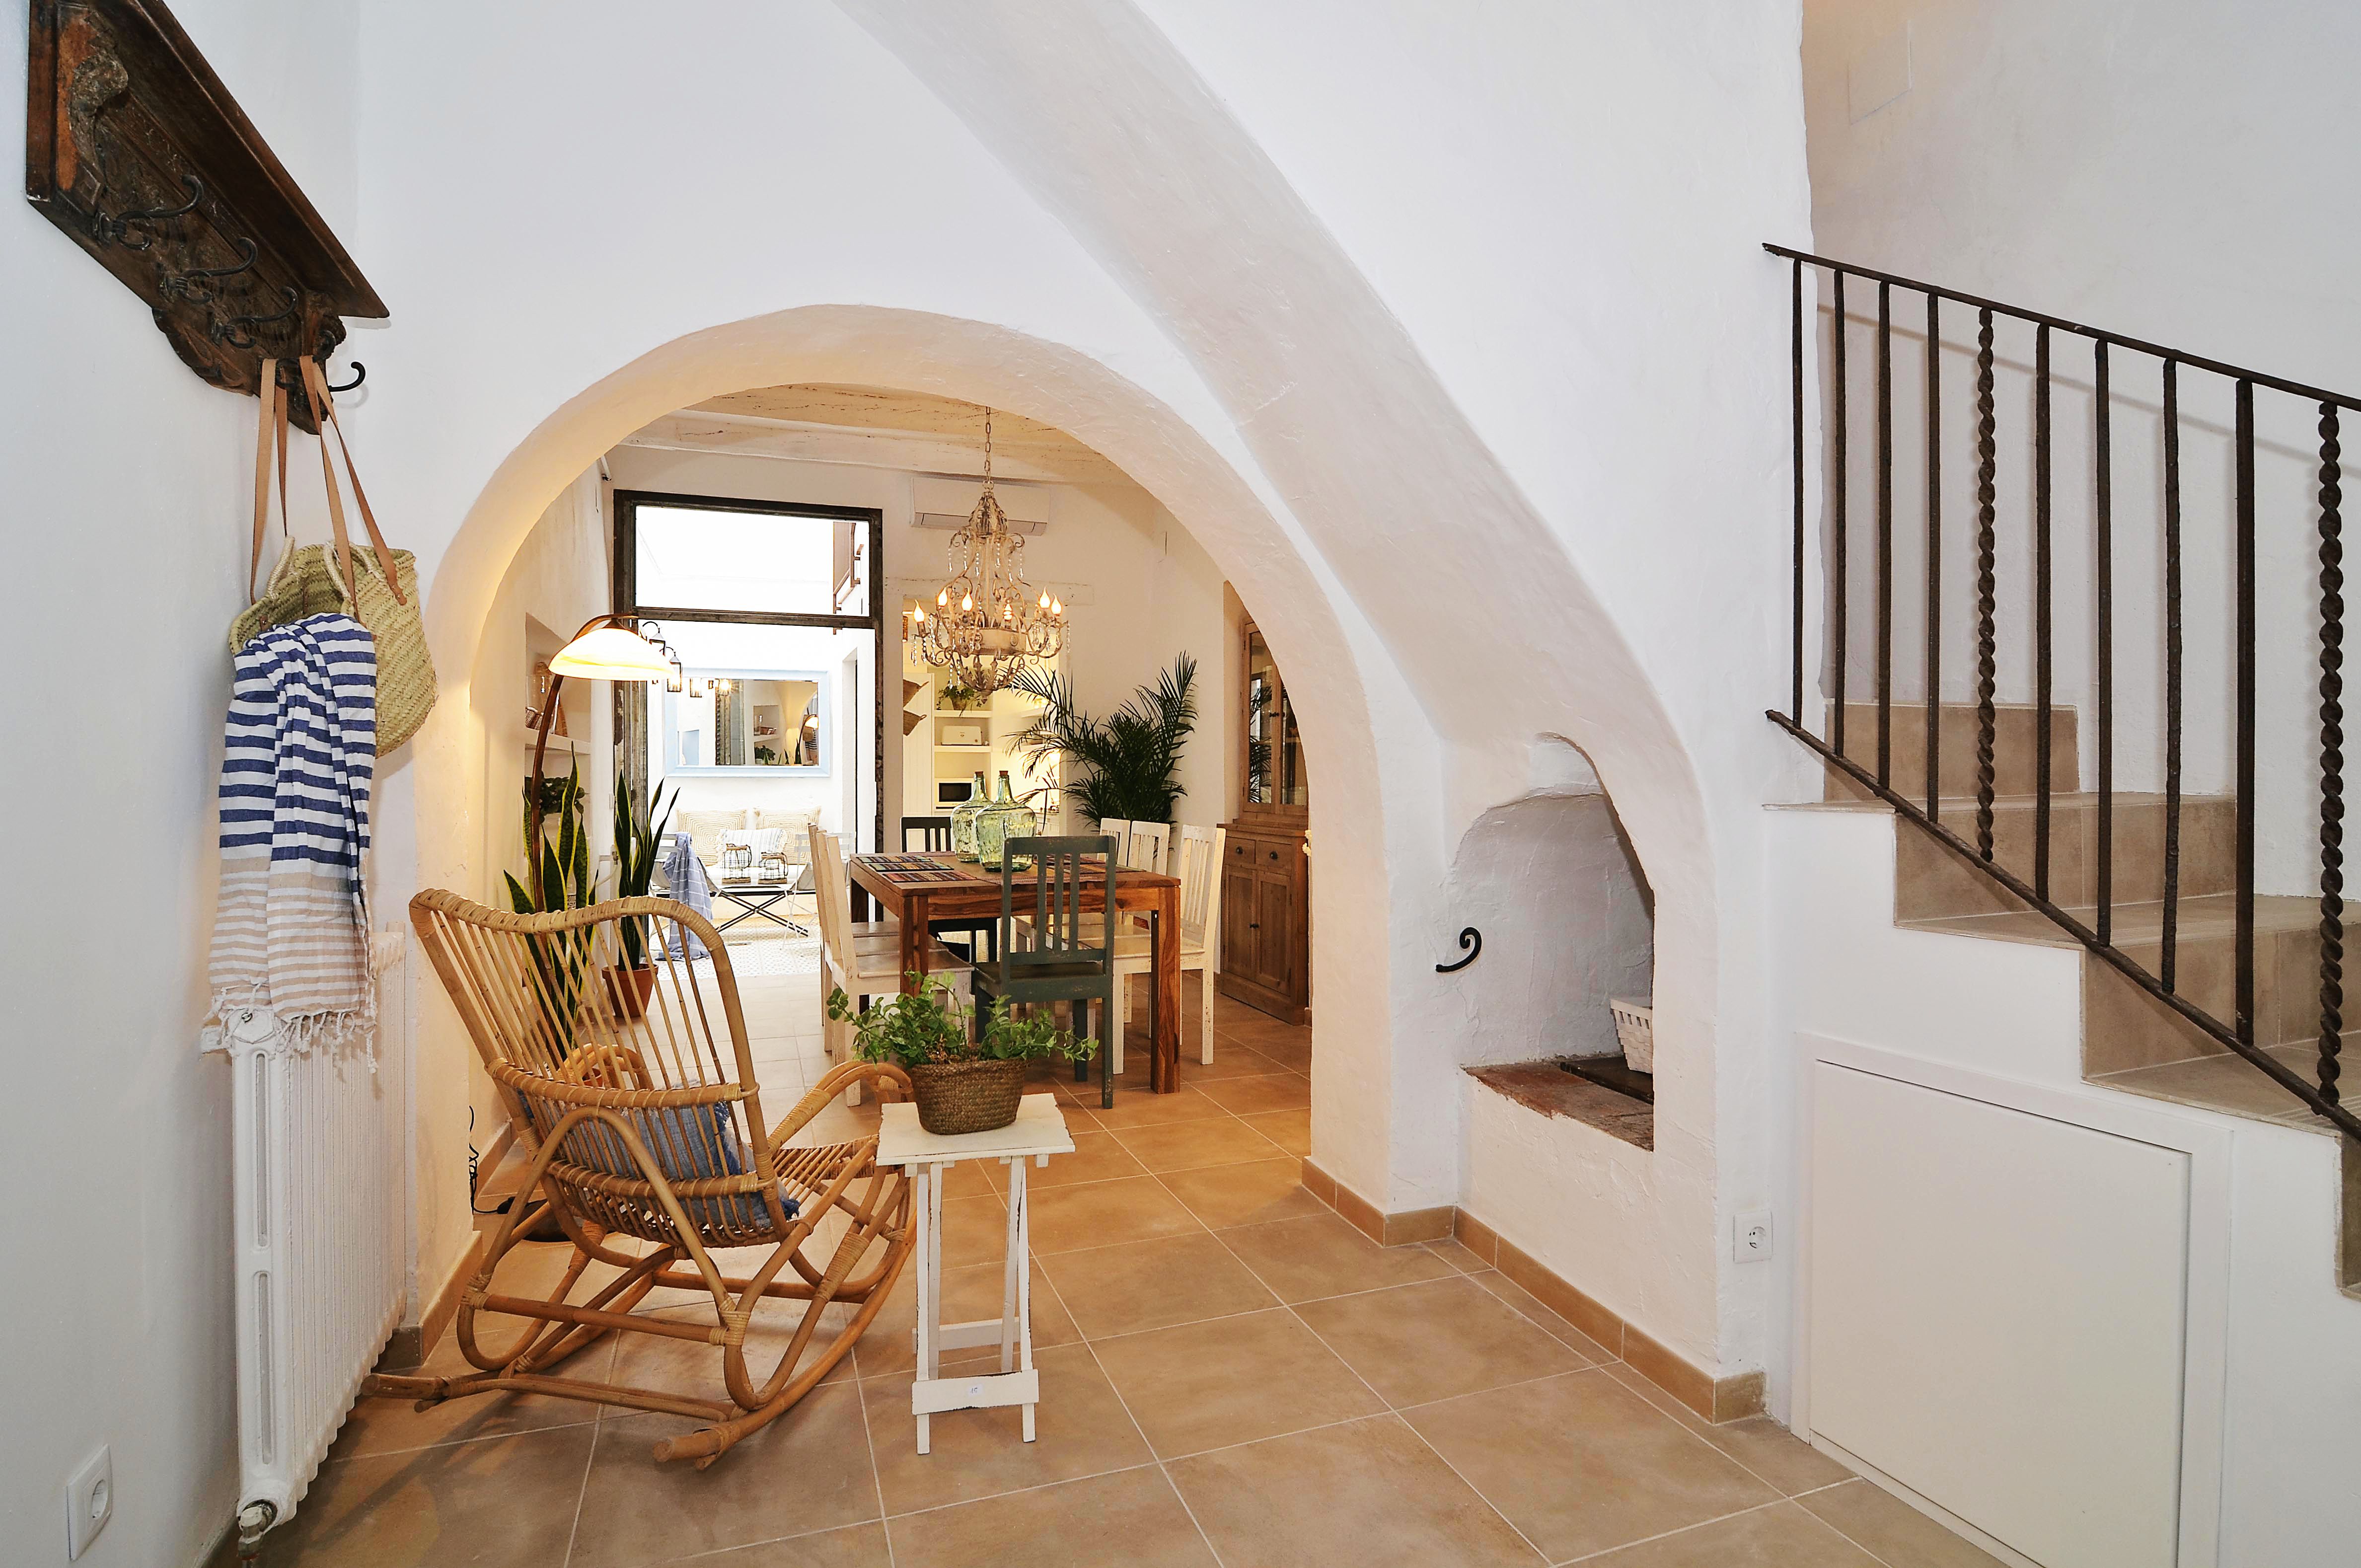 House tour: old fisherman's house in Sitges